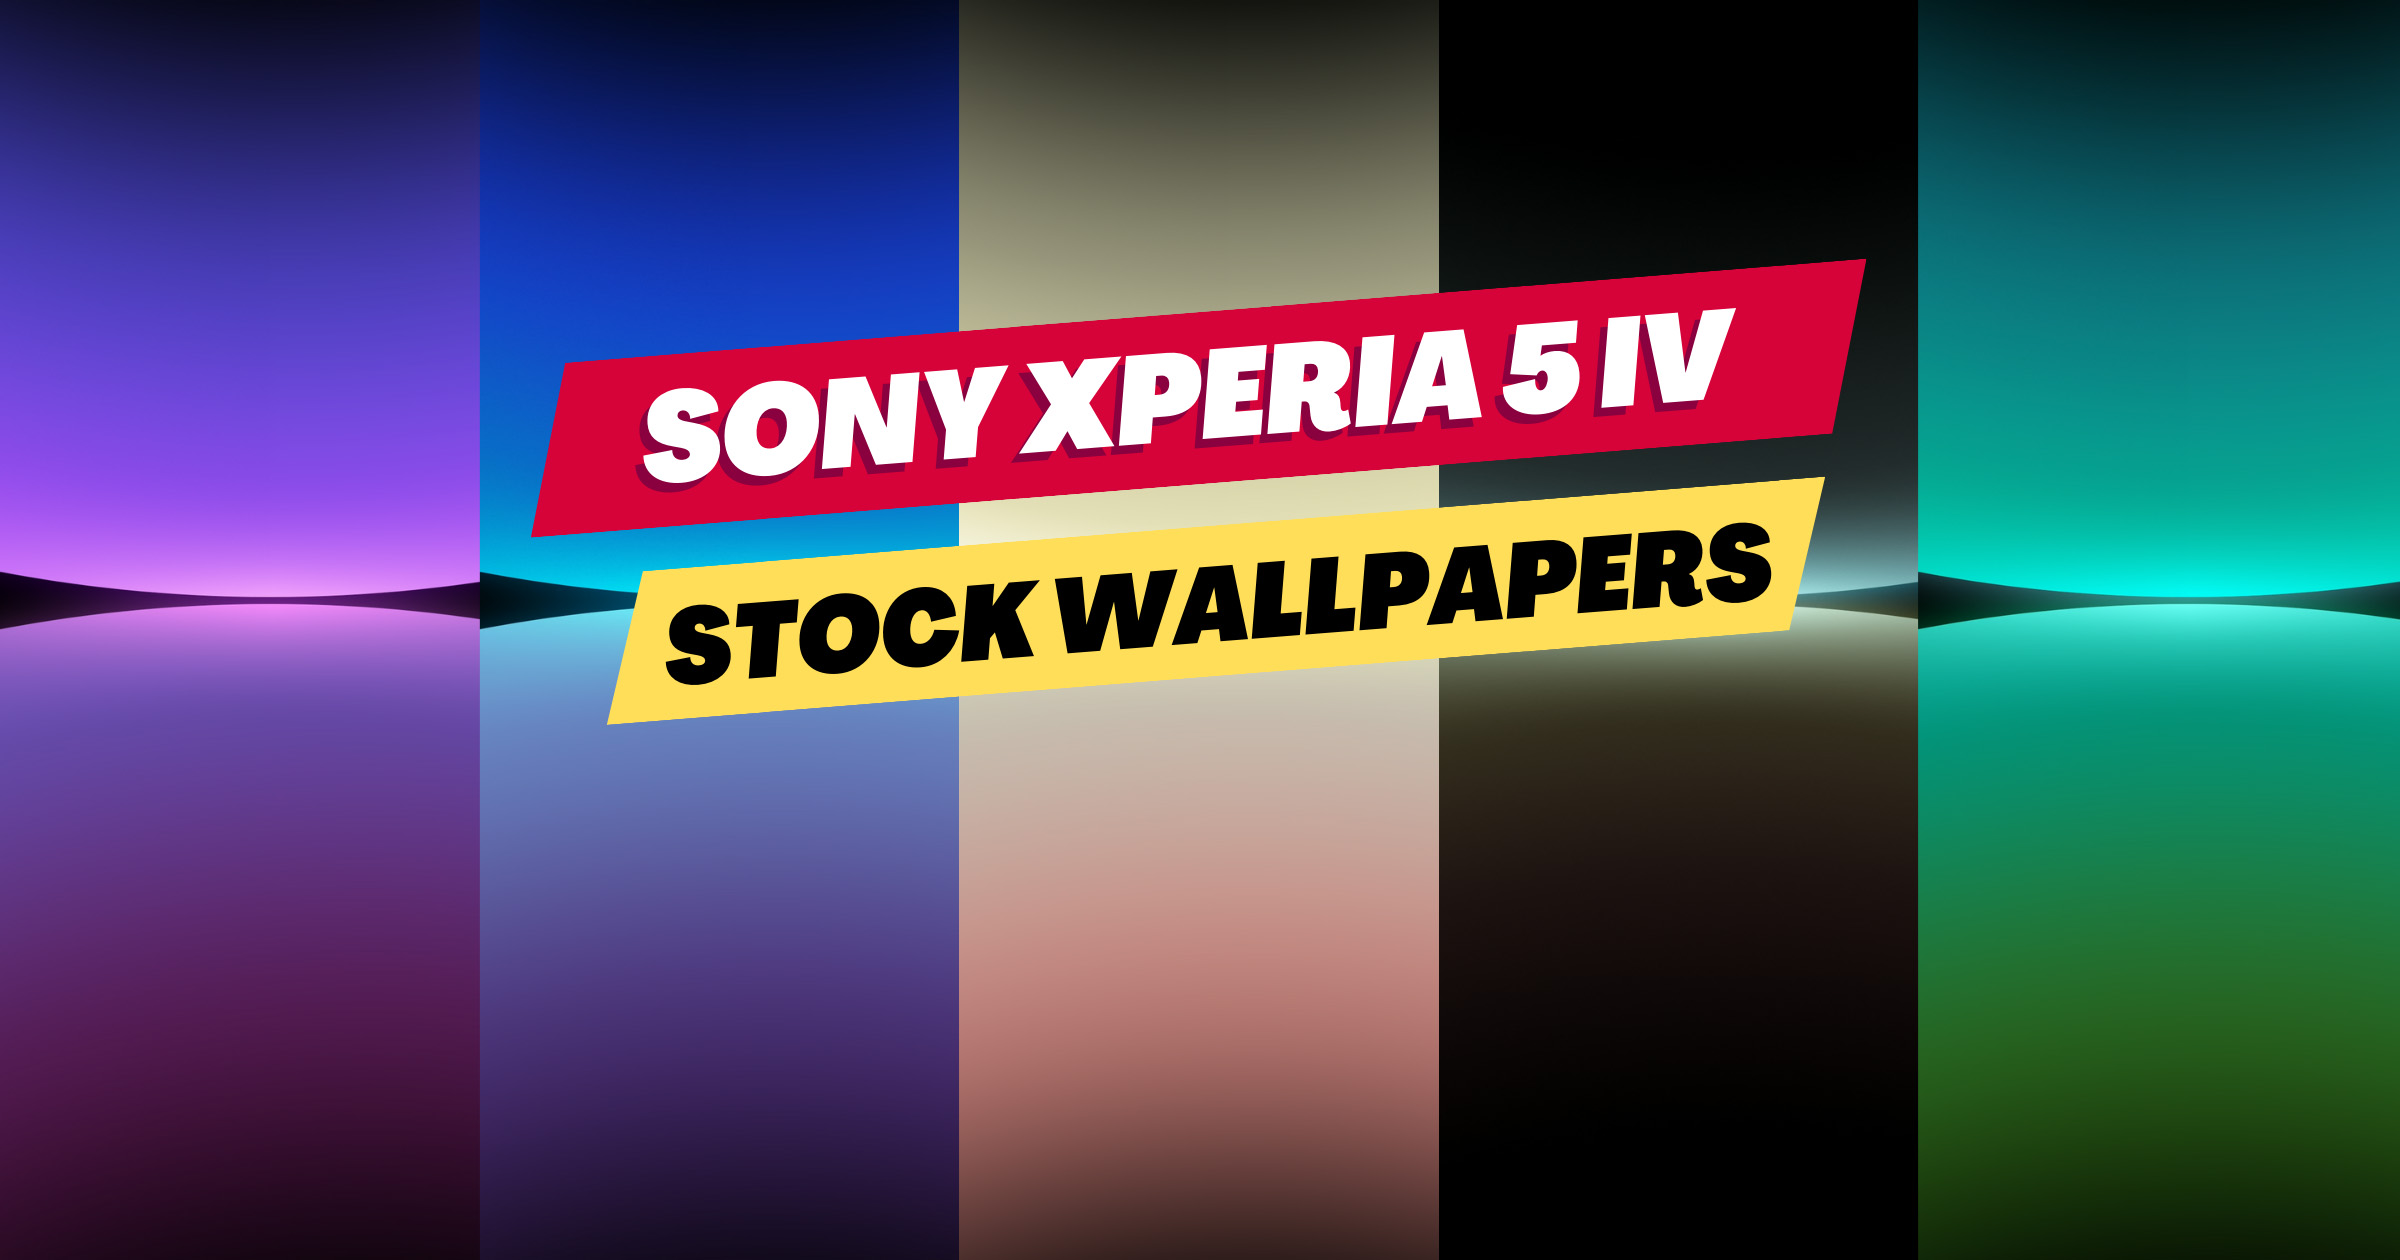 Sony Xperia Z5 Wallpaper (75+ images)